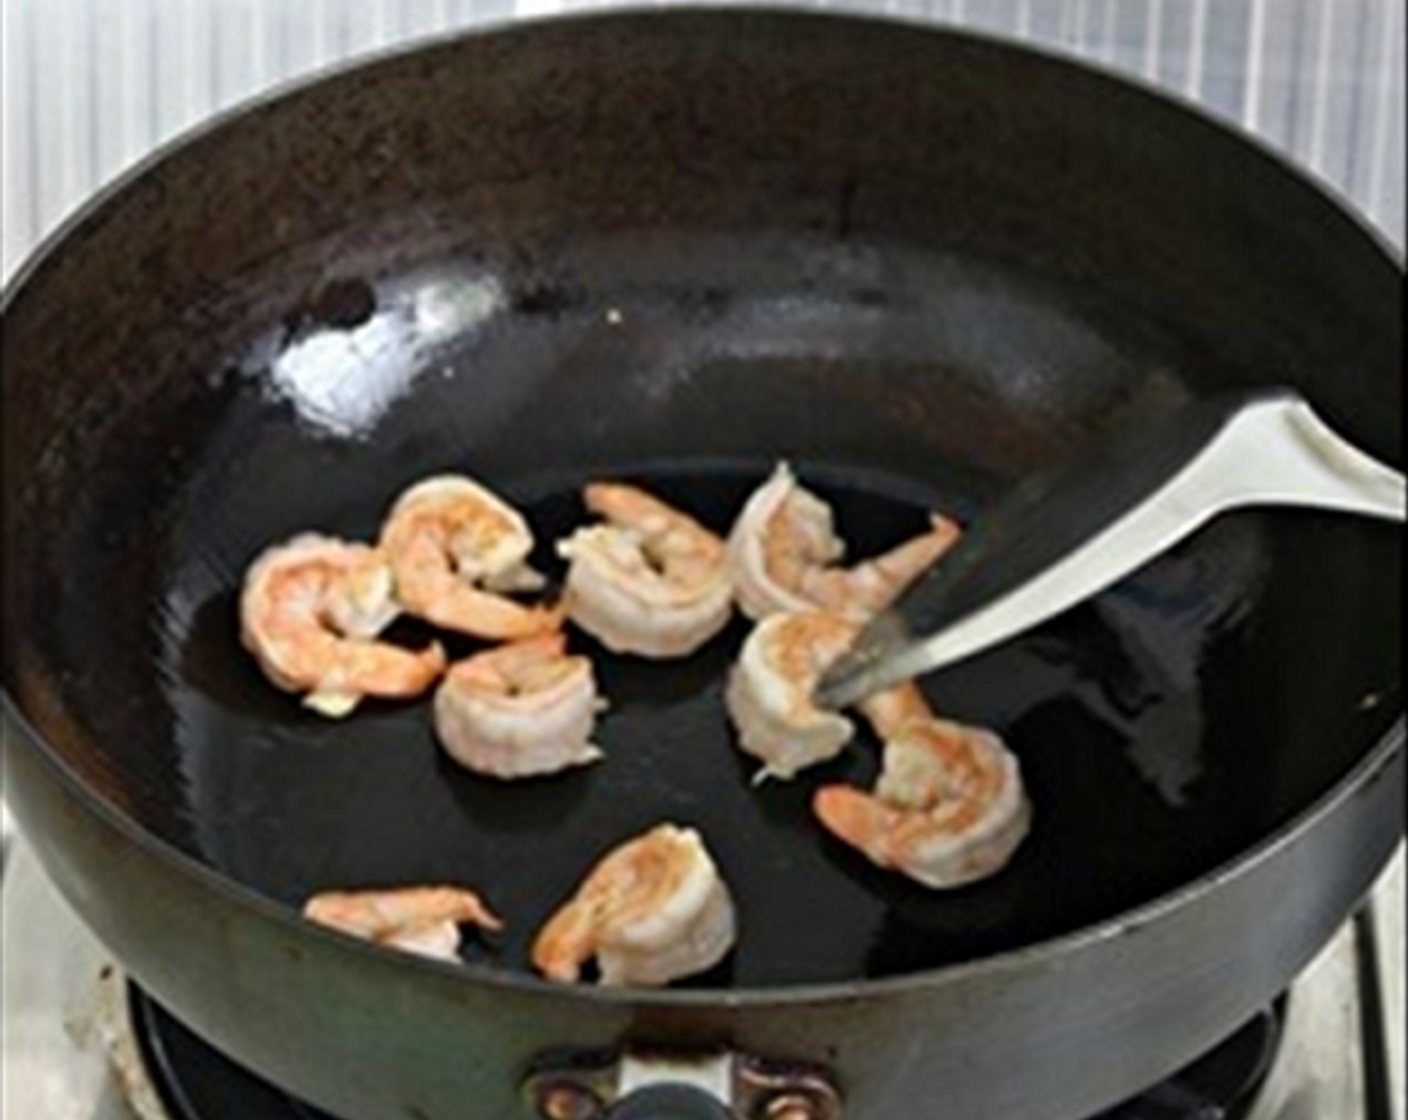 step 2 Add little oil to the same frying pan and fry Prawns (10) to almost cooked, dish up and set aside.